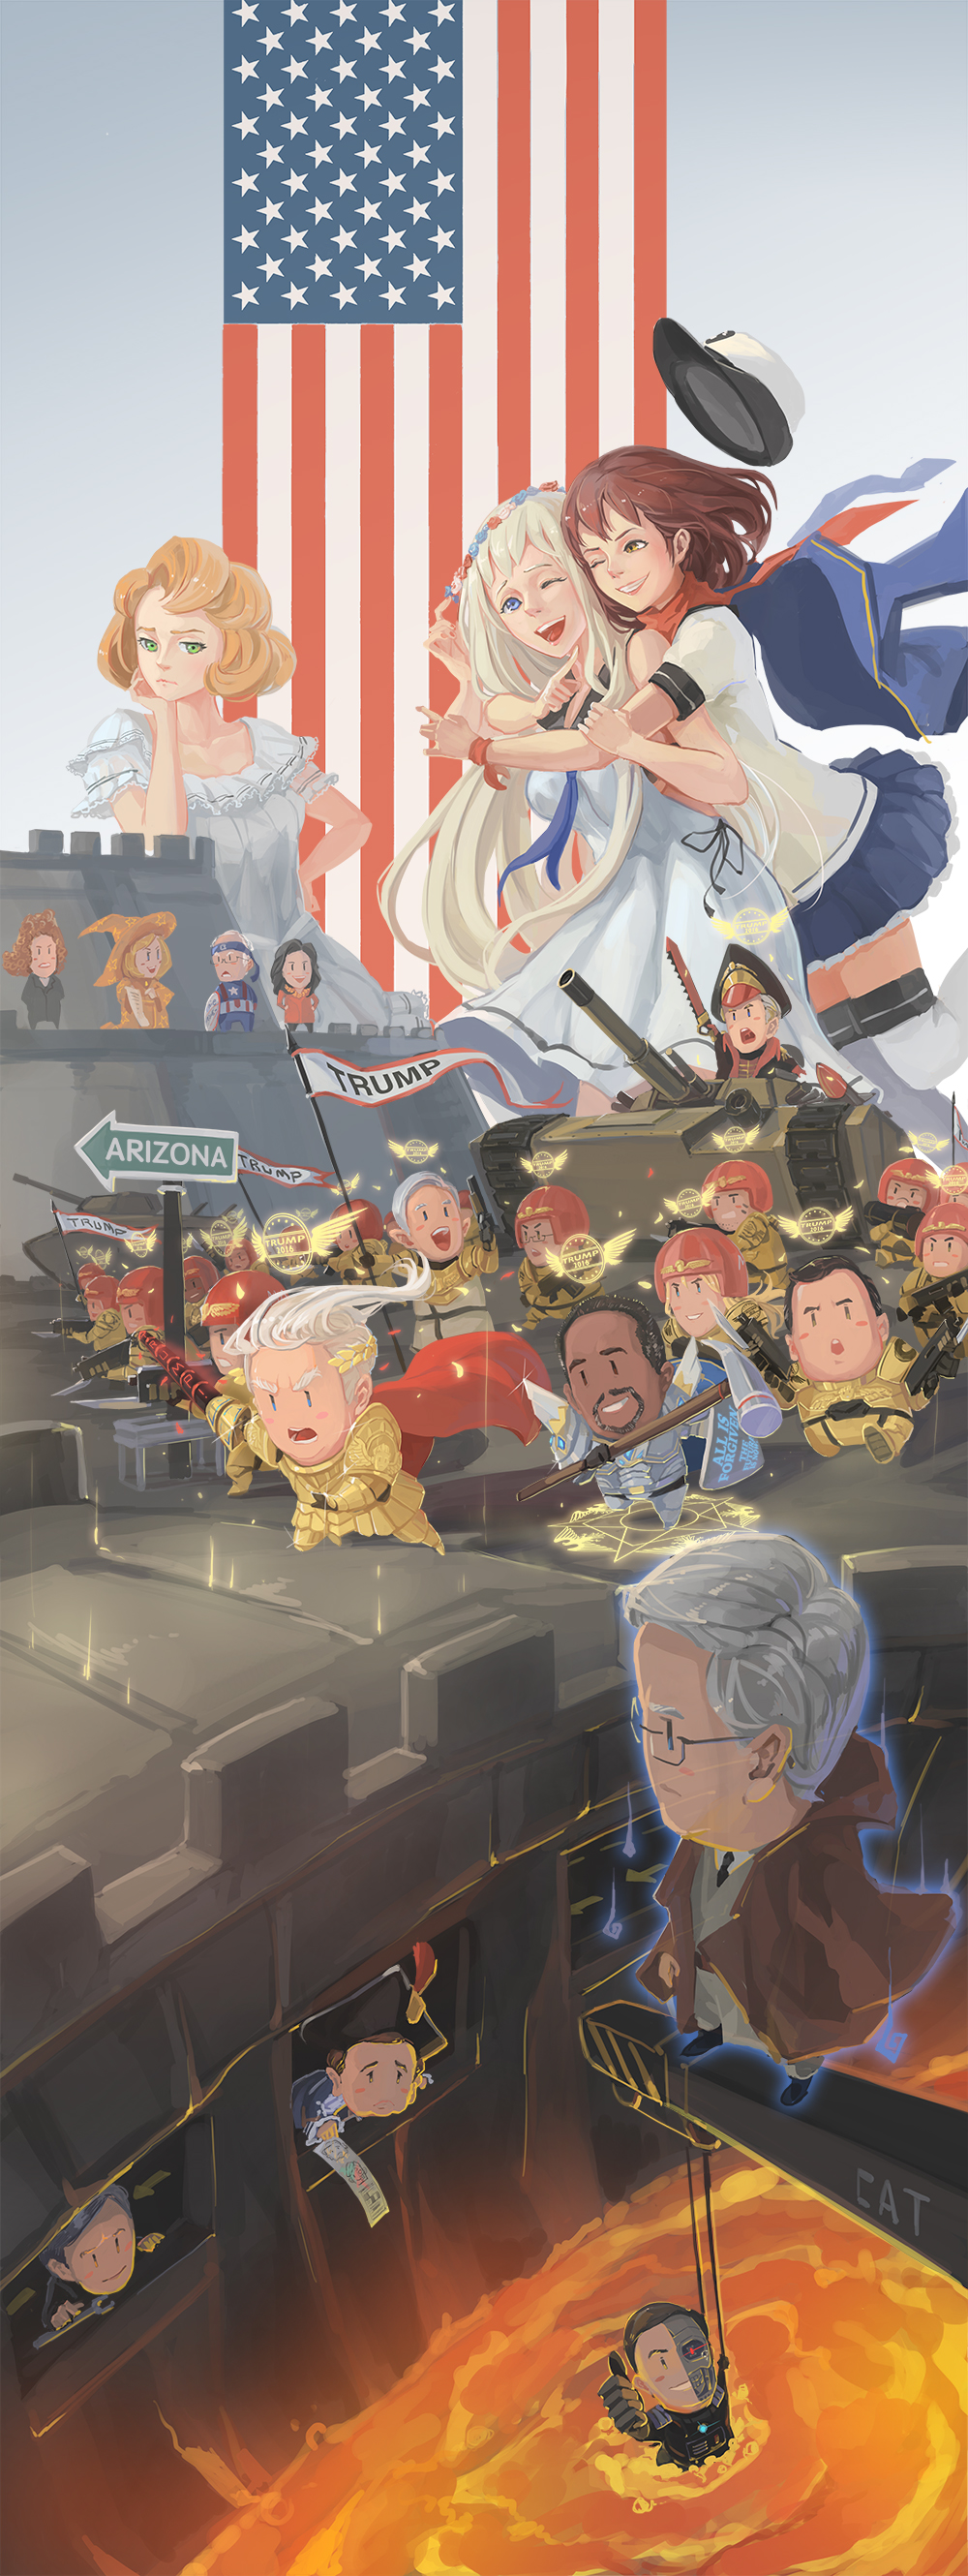 absurdres american_flag apron battle bayonet ben_carson bernie_sanders black_hair blonde_hair blue_eyes blue_skirt captain_america_(cosplay) chibi chris_christie cocktail cocktail_glass commentary_request commissar crane cup debbie_wasserman_schultz donald_trump dreadnought dress drinking_glass ea_(fate/stay_night) emperor_of_mankind_(cosplay) eyes fate/stay_night fate_(series) gilgamesh_(cosplay) green_eyes gun hairband hammer hat hat_removed head_in_hand headwear_removed helmet highres hillary_clinton hug hug_from_behind imperial_guard jeb_bush john_kasich looking_at_viewer magic_circle marco_rubio marvel military military_vehicle milo_yiannopoulos multiple_boys multiple_girls musket one_eye_closed open_mouth orange_hat pacific politician politics real_life rifle sima_naoteng skirt star_wars sword tank ted_cruz terminator thigh-highs tulsi_gabbard uss_arizona_(bb-39) uss_florida_(bb-30) uss_missouri_(bb-63) vehicle warhammer warhammer_40k weapon white_dress white_hair white_legwear witch_hat